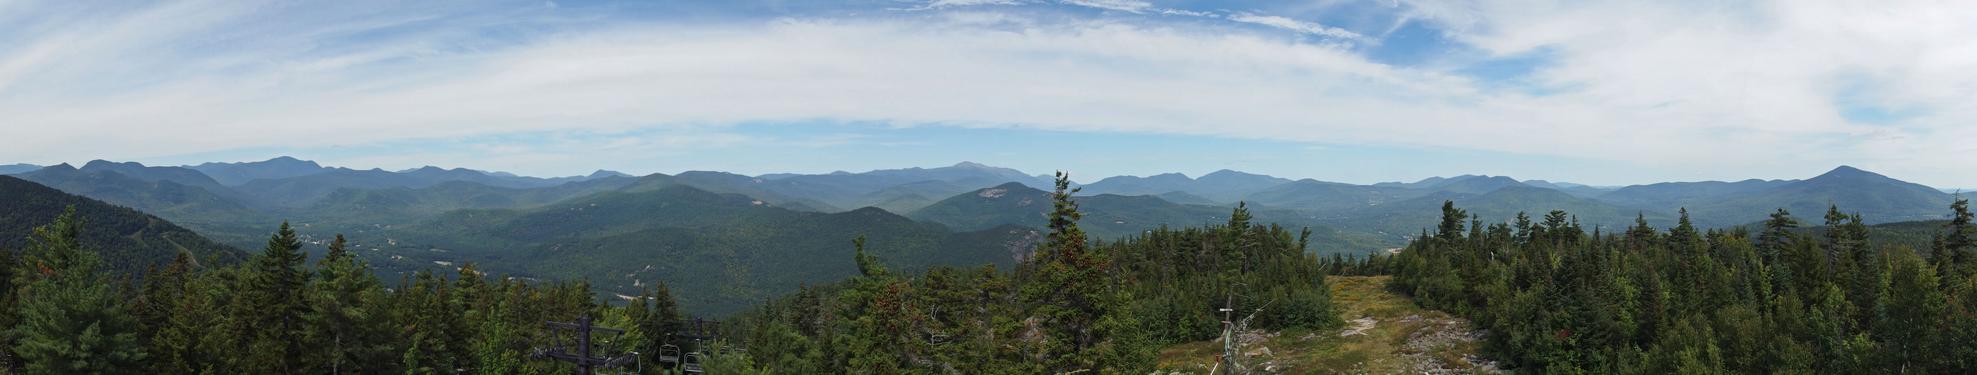 180-degree panorama of the White Mountains as seen from the viewing platform at Little Attitash Mountain in New Hampshire